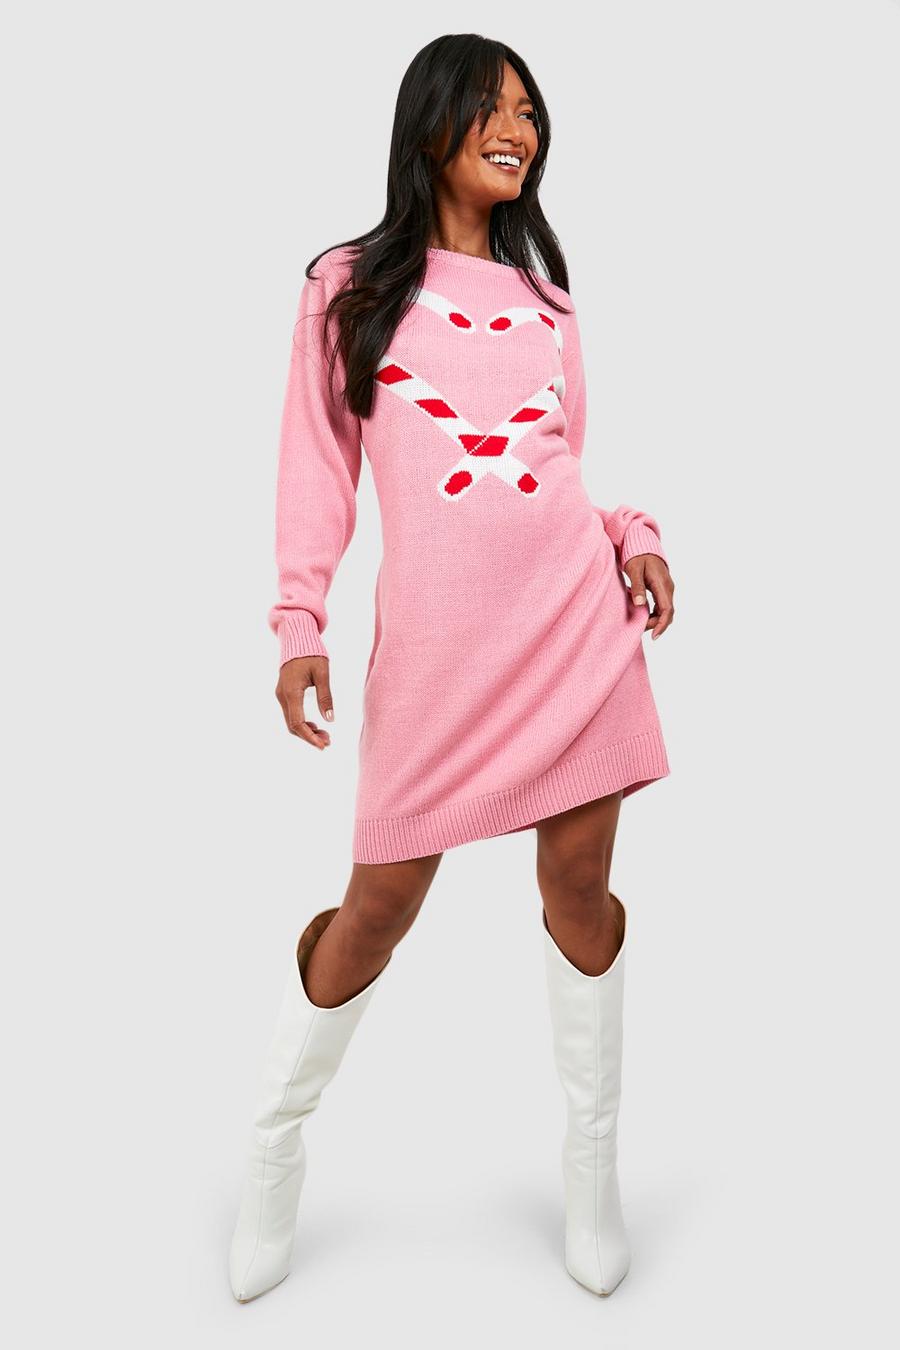 Pink Candy Cane Christmas Sweater Dress